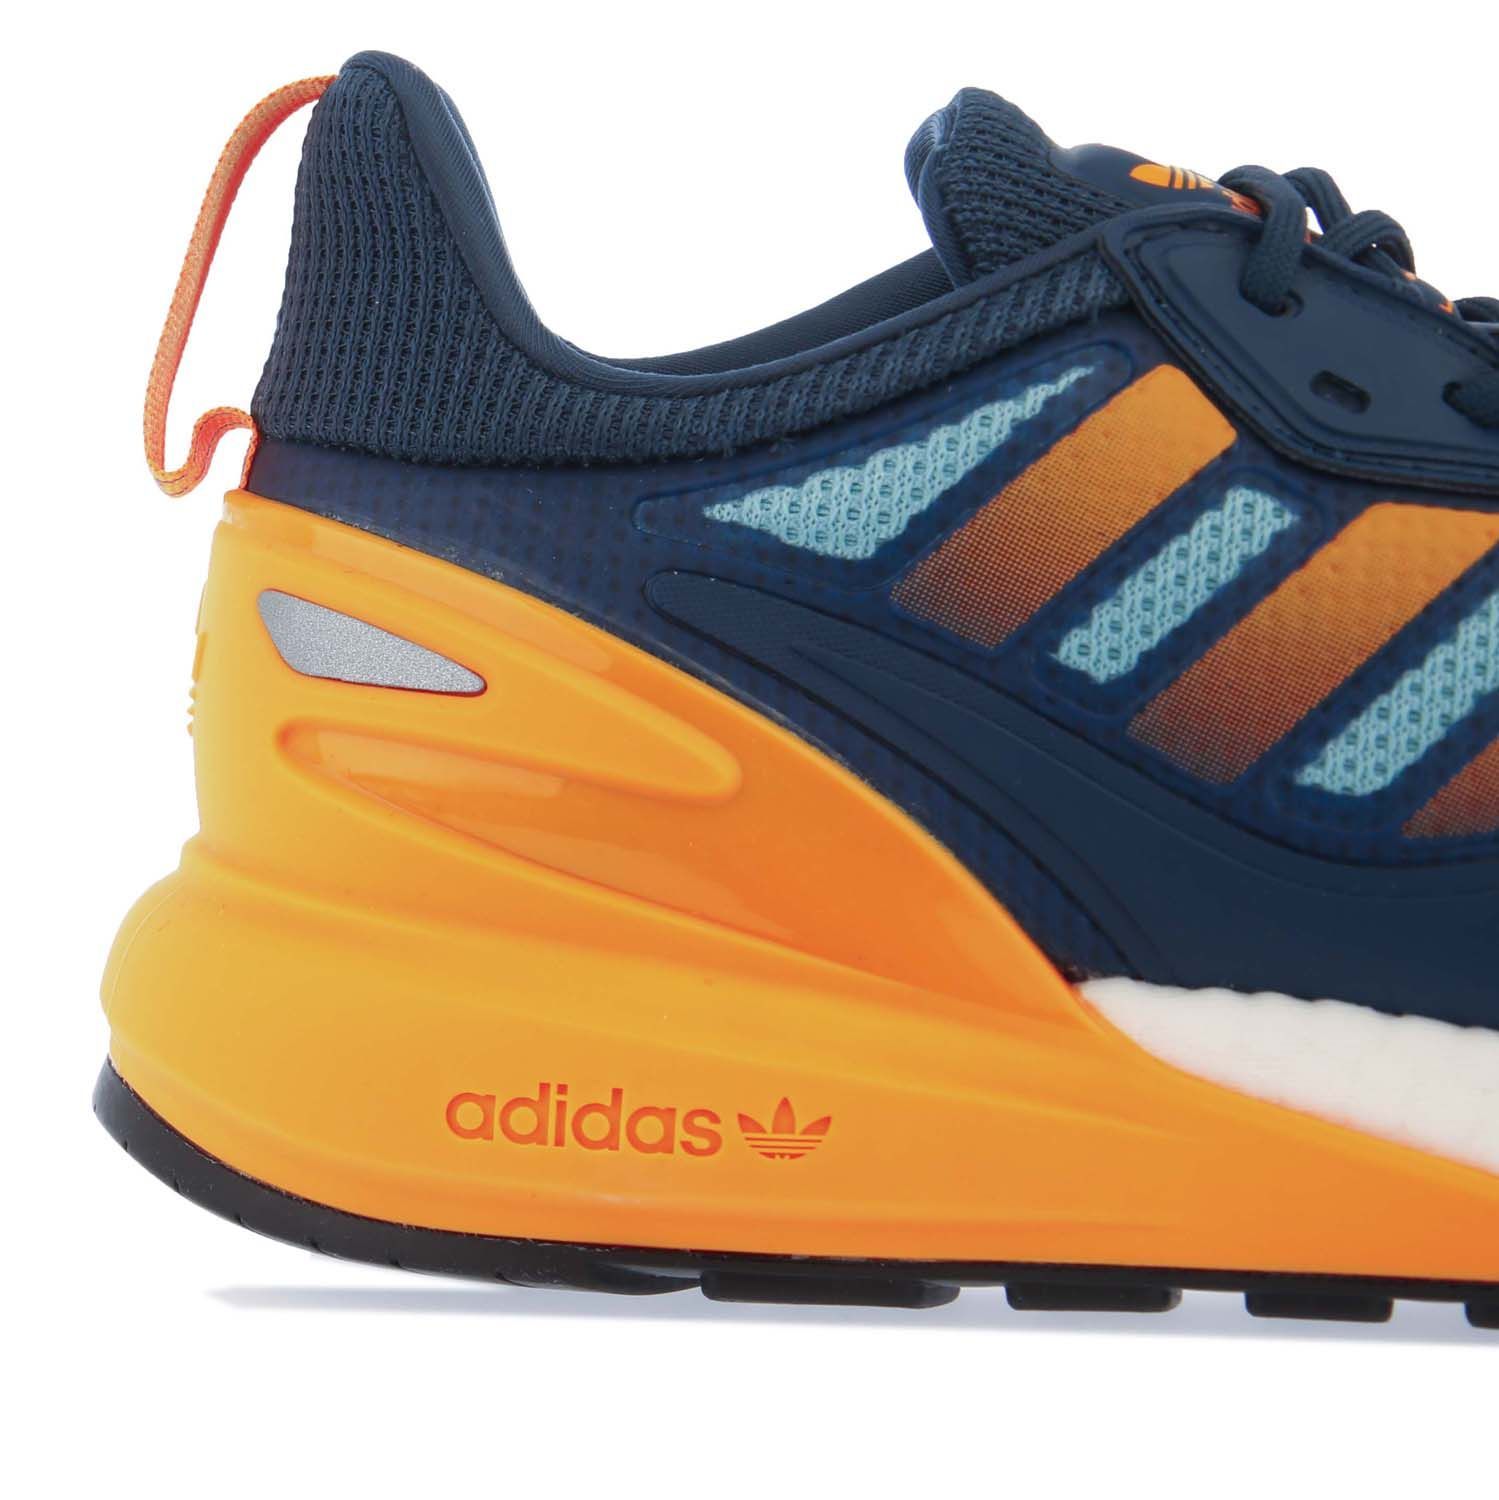 Junior adidas Originals ZX 2K Boost 2.0 Trainers in navy.- Mesh  TPU and neoprene upper. - Lace up fastening.- Trefoil brand on tongue and heel.- Reflective details. - Boost midsole.- Rubber outsole.- Textile and Synthetic upper  Textile lining  Synthetic sole. - Ref.: GZ7501J